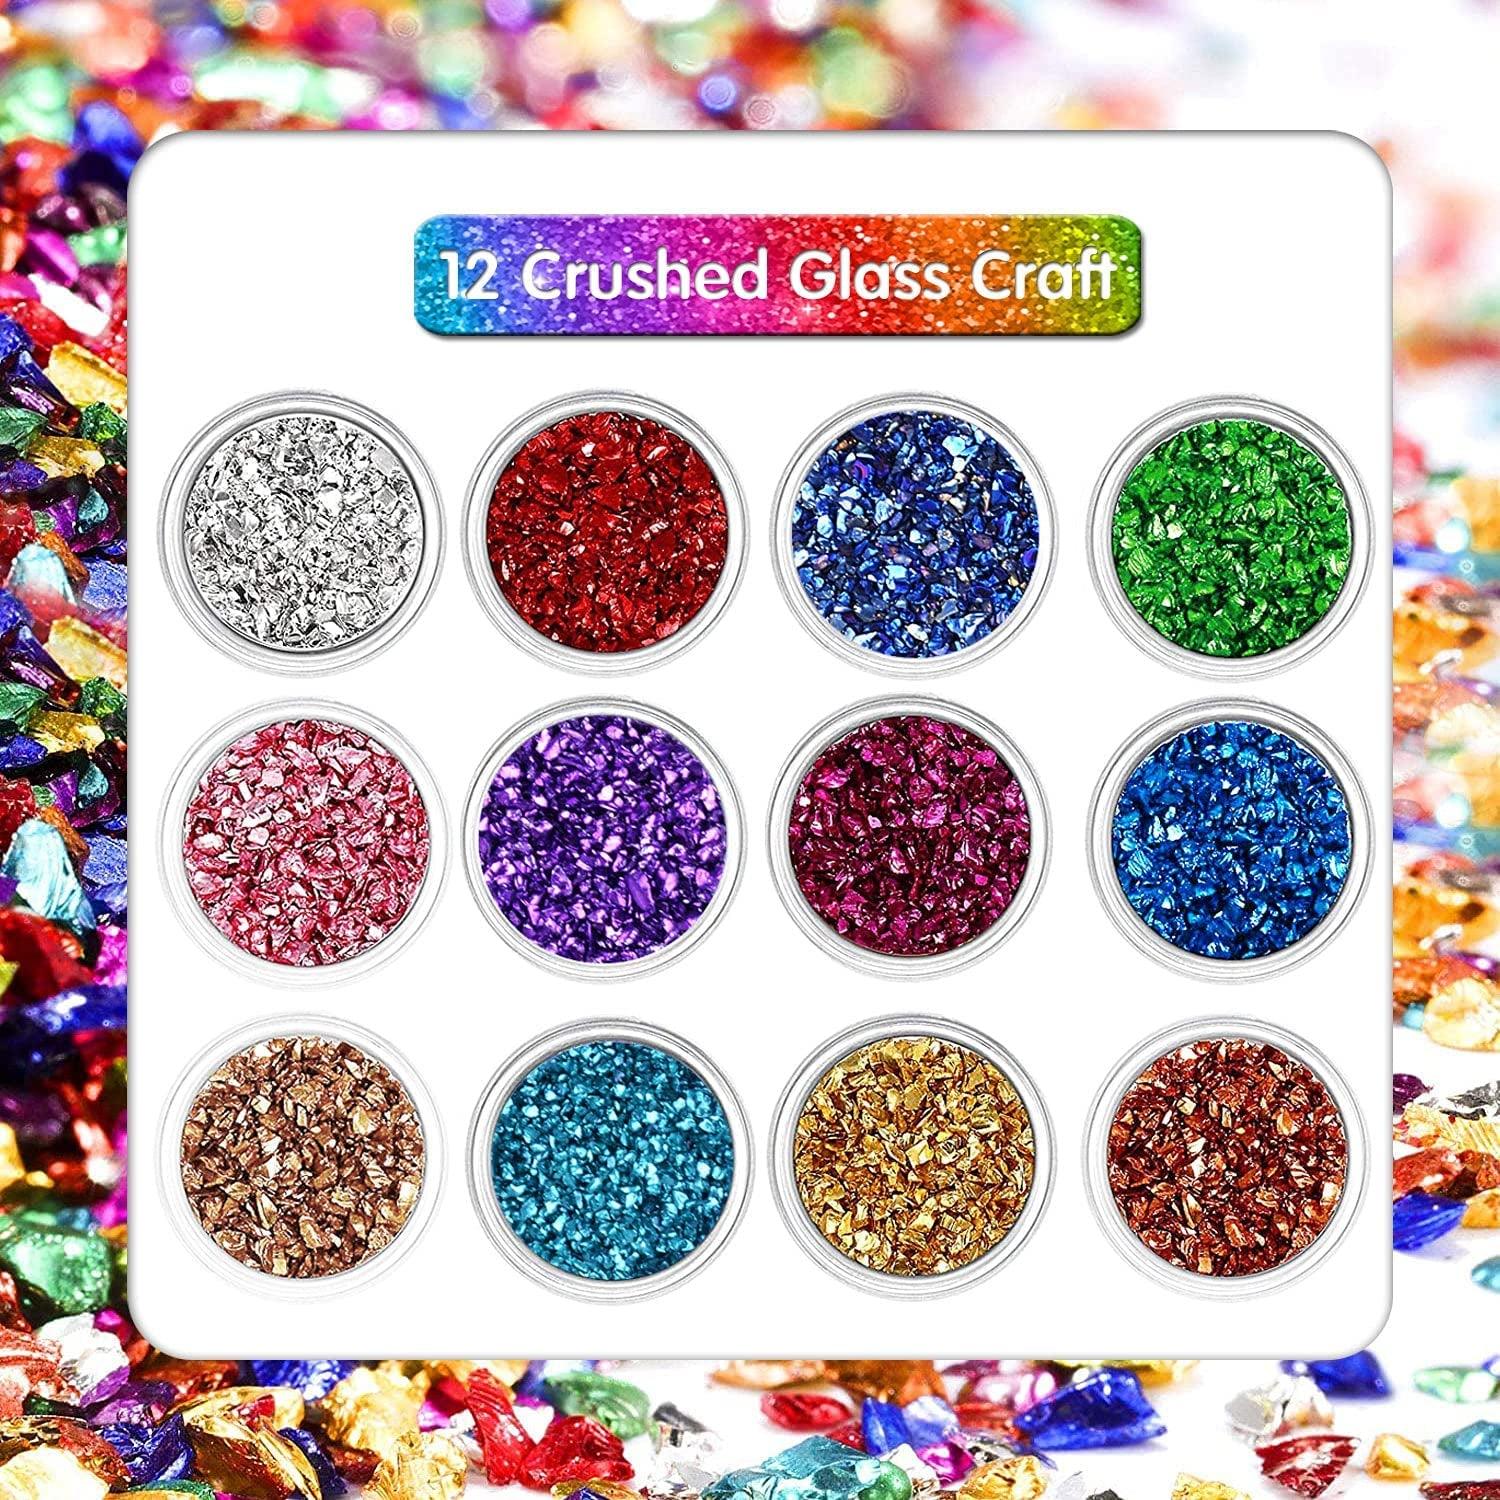 DIYCICO 12 Box Crushed Glass Craft Glitter Fine for Resin Art, Small Broken Glass Pieces Irregular Metallic Crystal Chips Chunky Flakes Sequins for